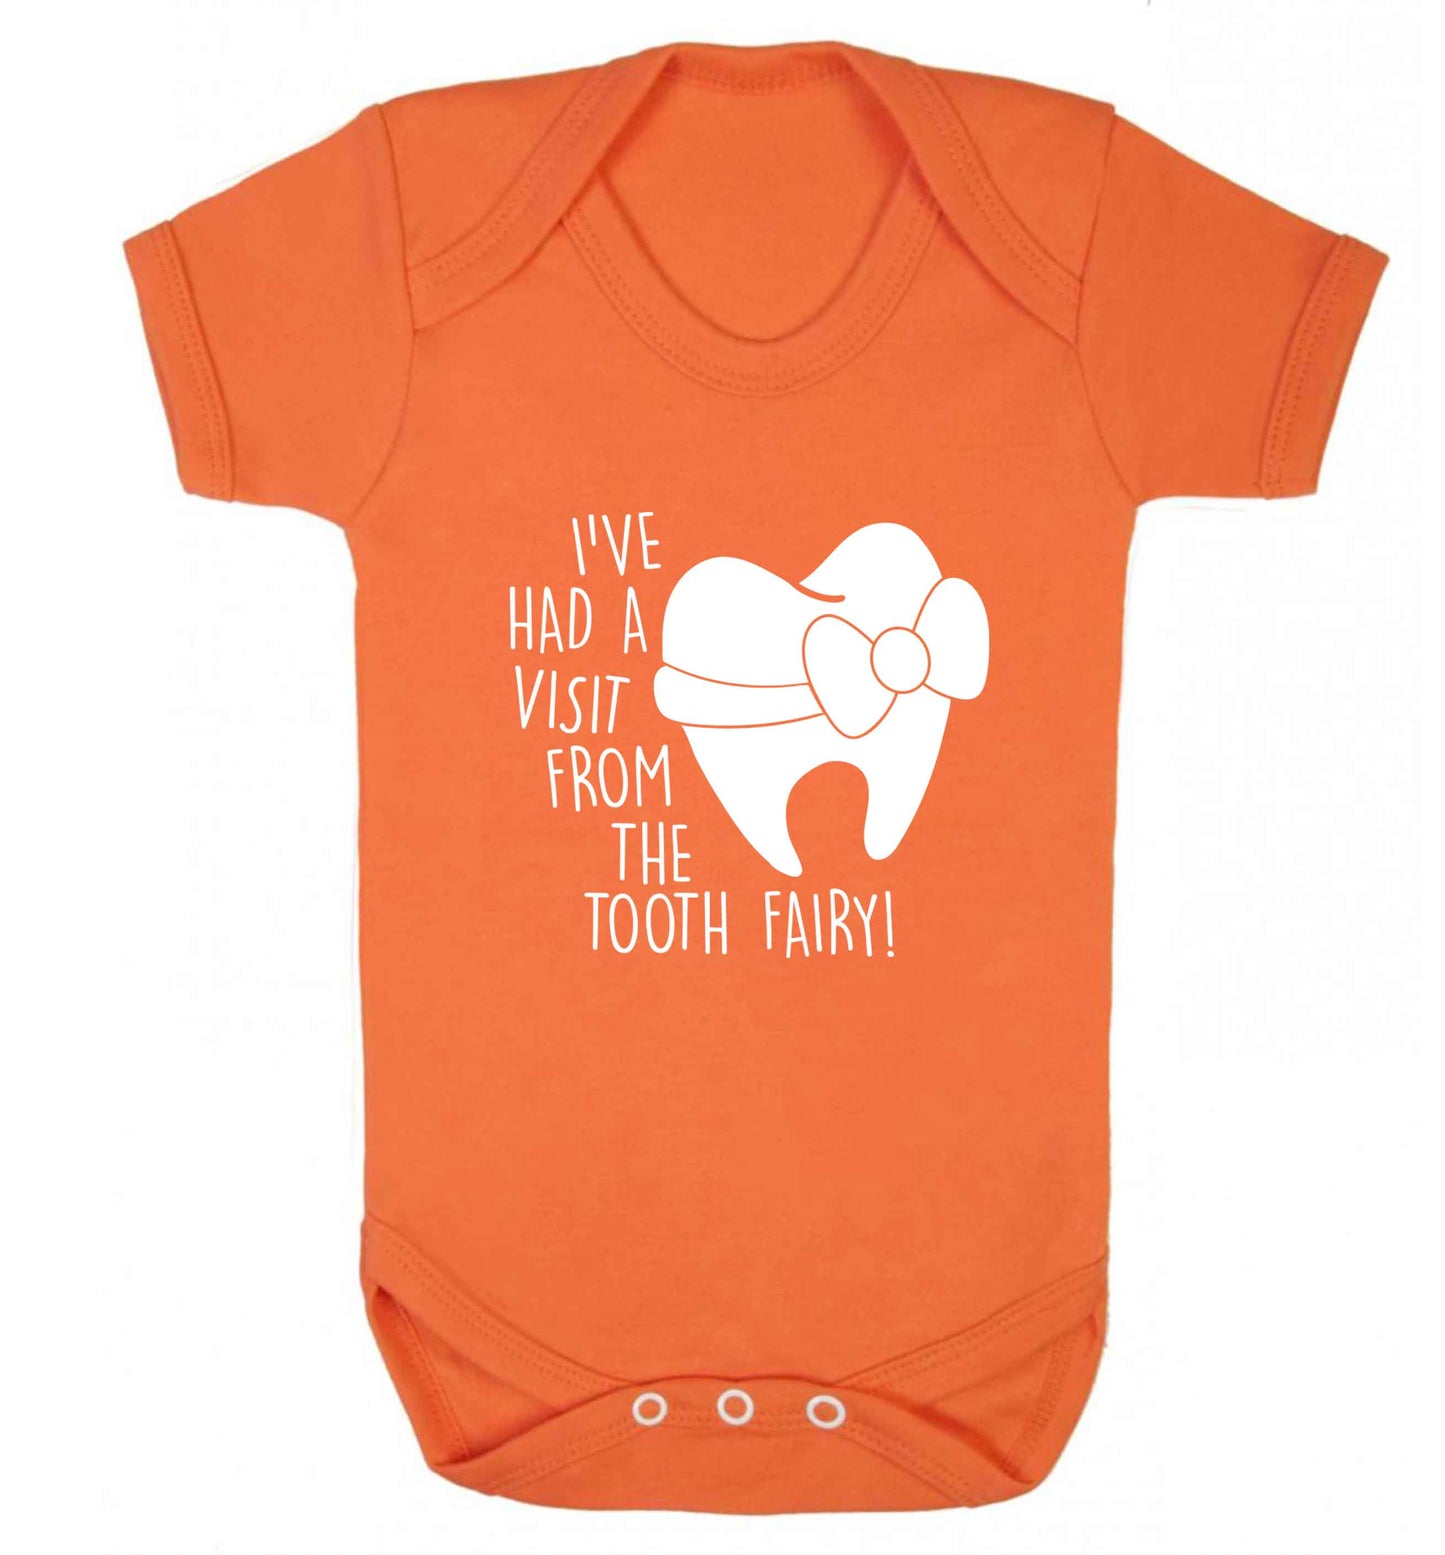 Visit From Tooth Fairy baby vest orange 18-24 months